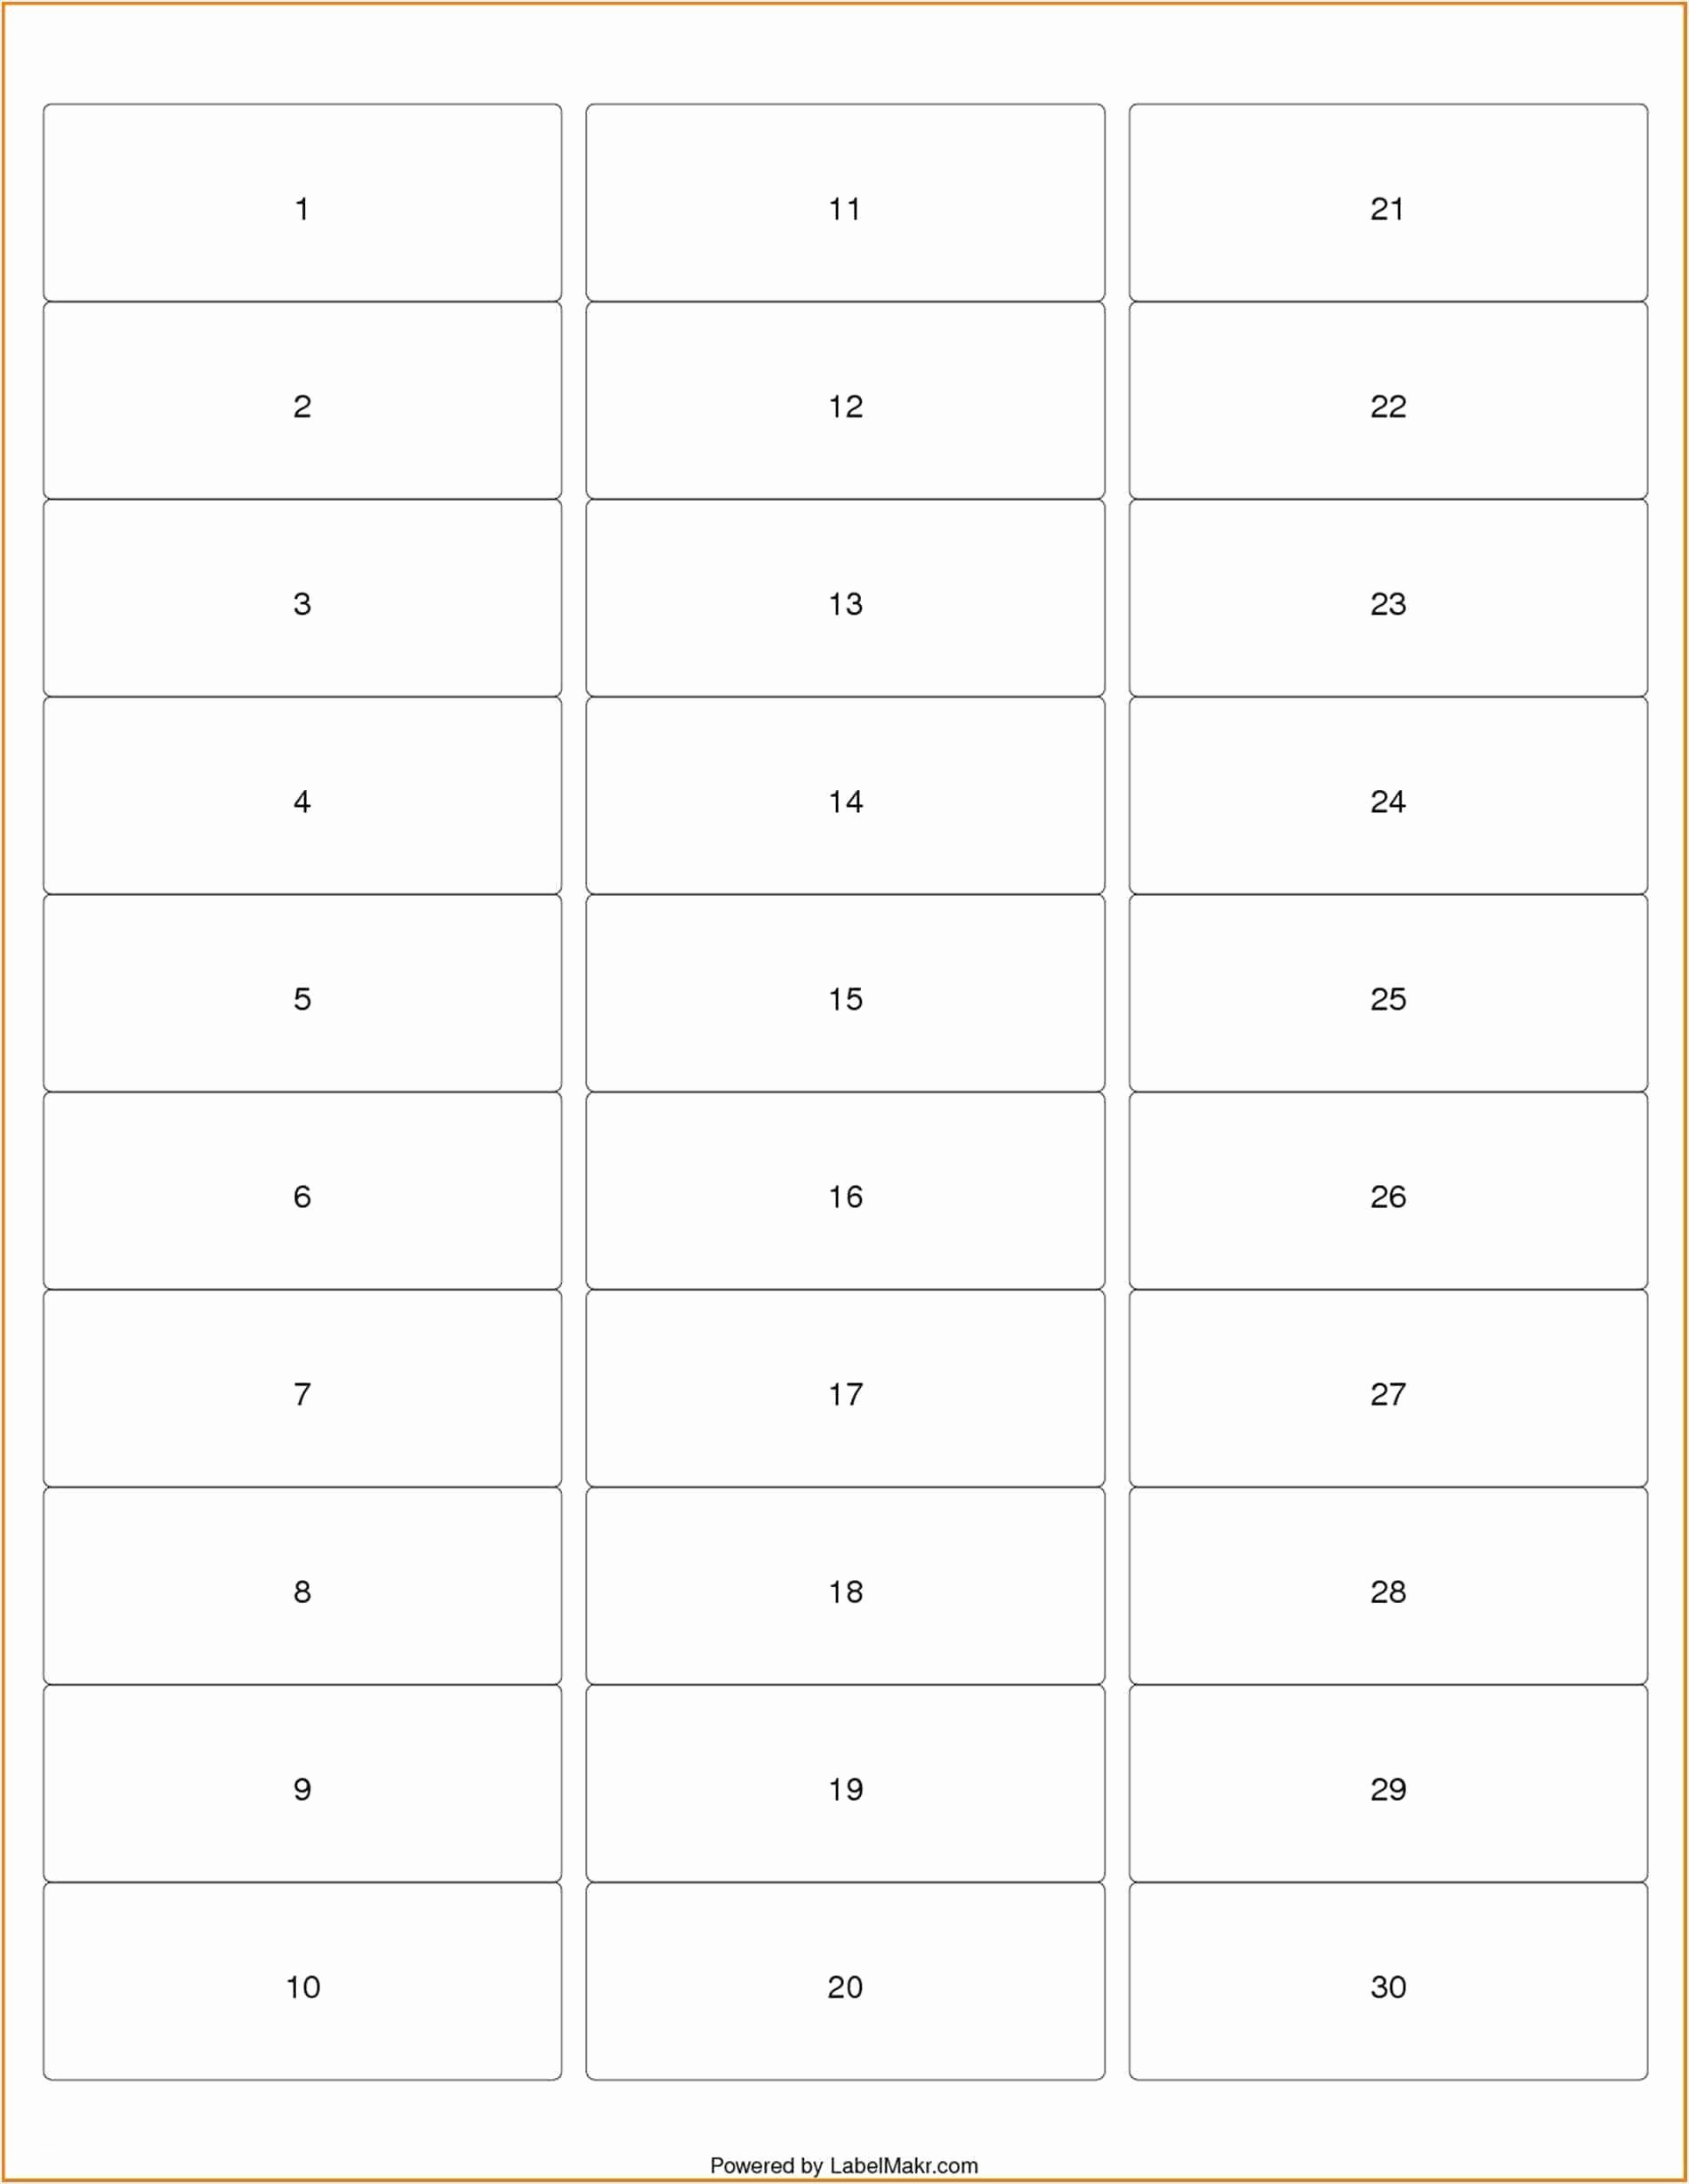 Download Template For Avery 5160 Labels From Excel In Template For Avery 5160 Labels From Excel Letter